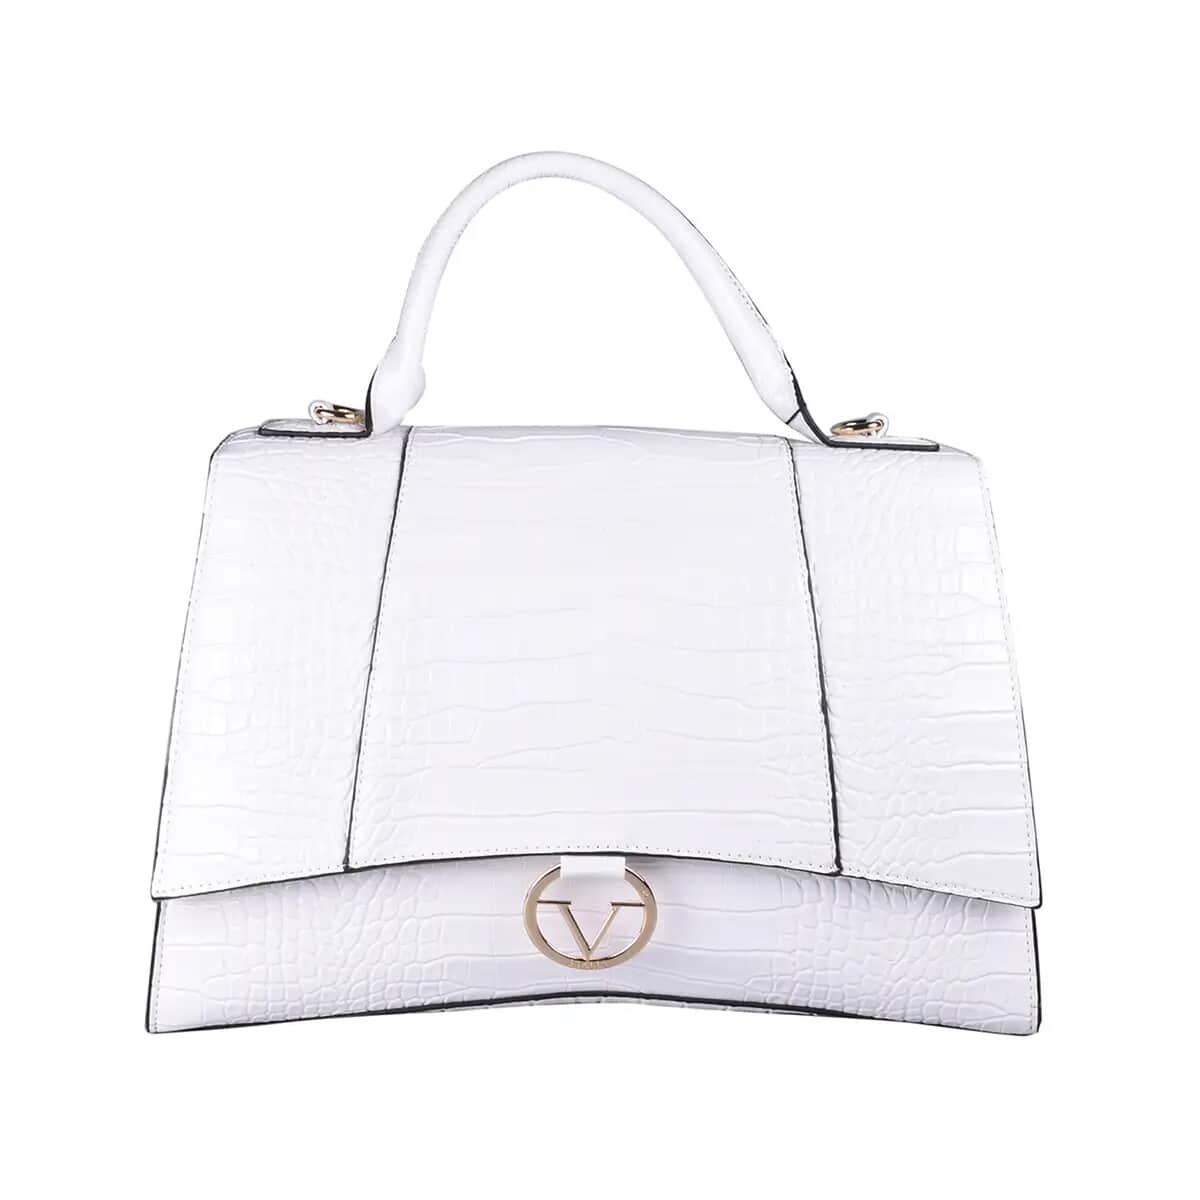 19V69 ITALIA by Alessandro Versace Crocodile Embossed Faux Leather Satchel Bag with Metallic Clasp Closure - White | Cute Satchel Bags | Satchel Messenger Bag | Faux Leather Tote Bags | Women's Utility Bag image number 0